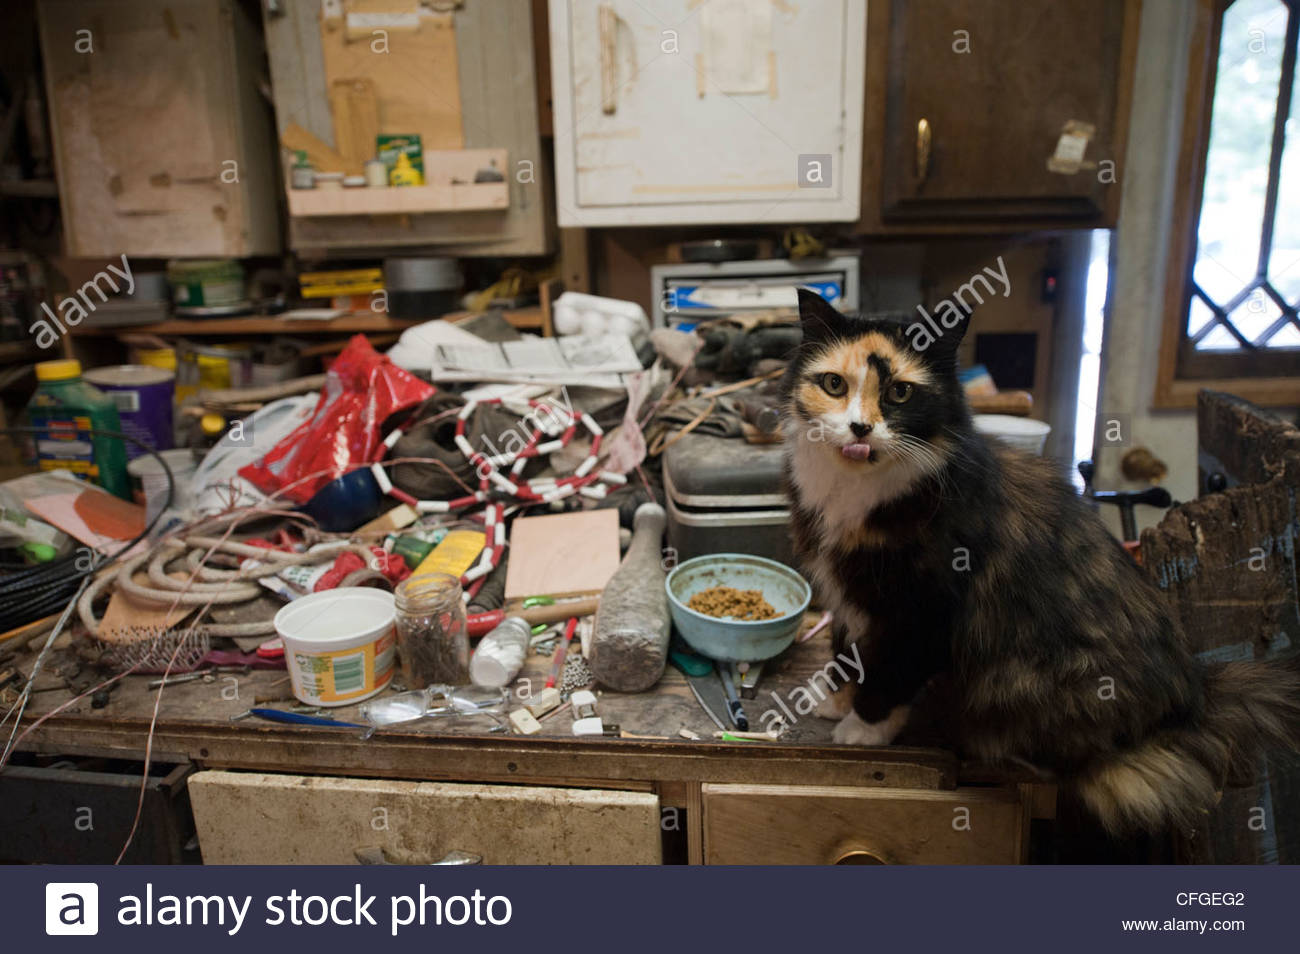 A Cat Sits On A Cluttered Countertop In Lincoln Ne Stock Photo